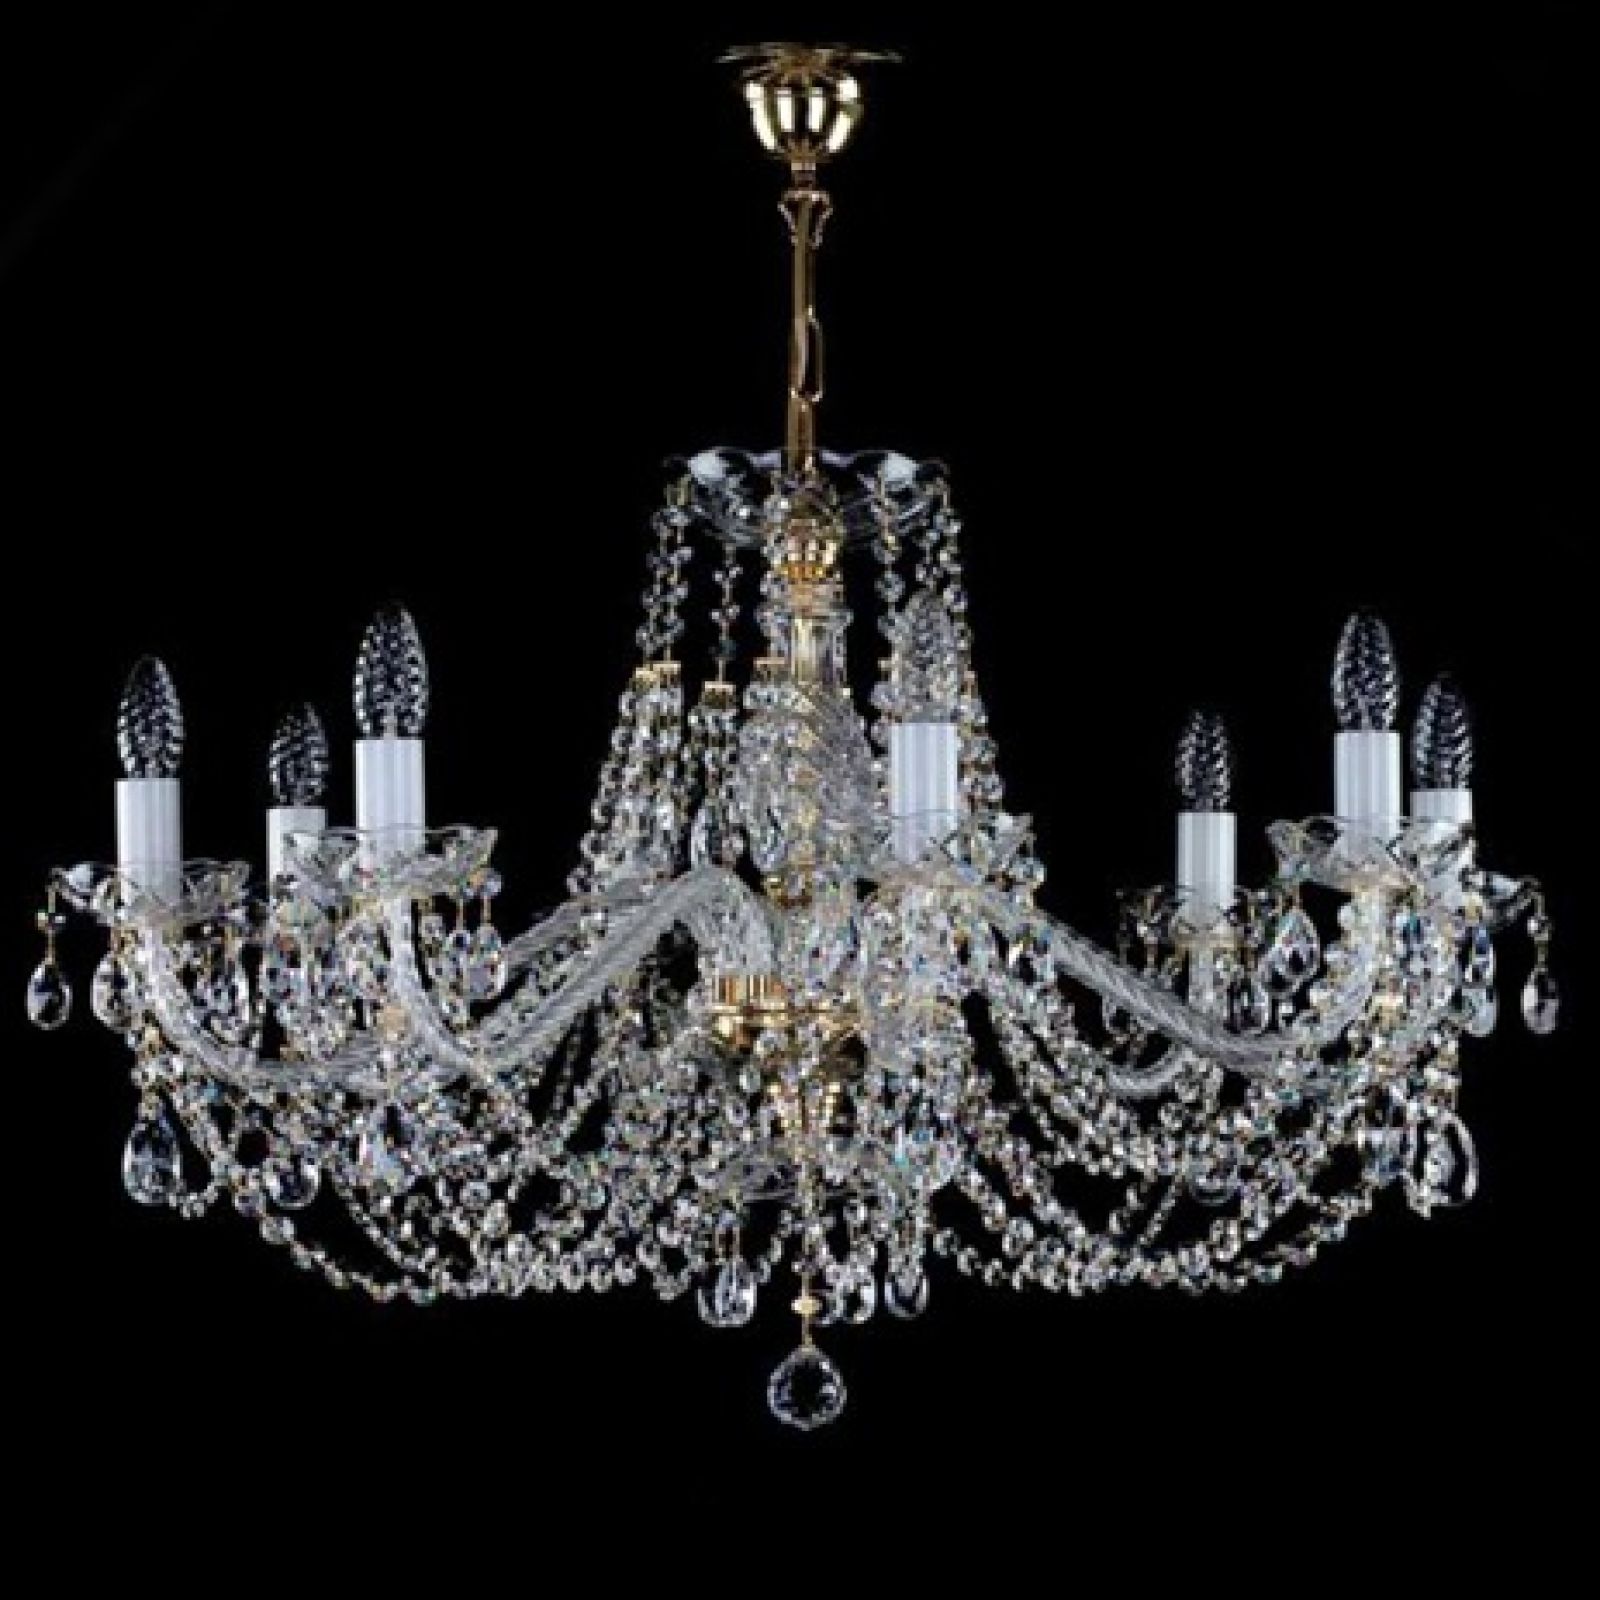 Chandelier with crystal chains